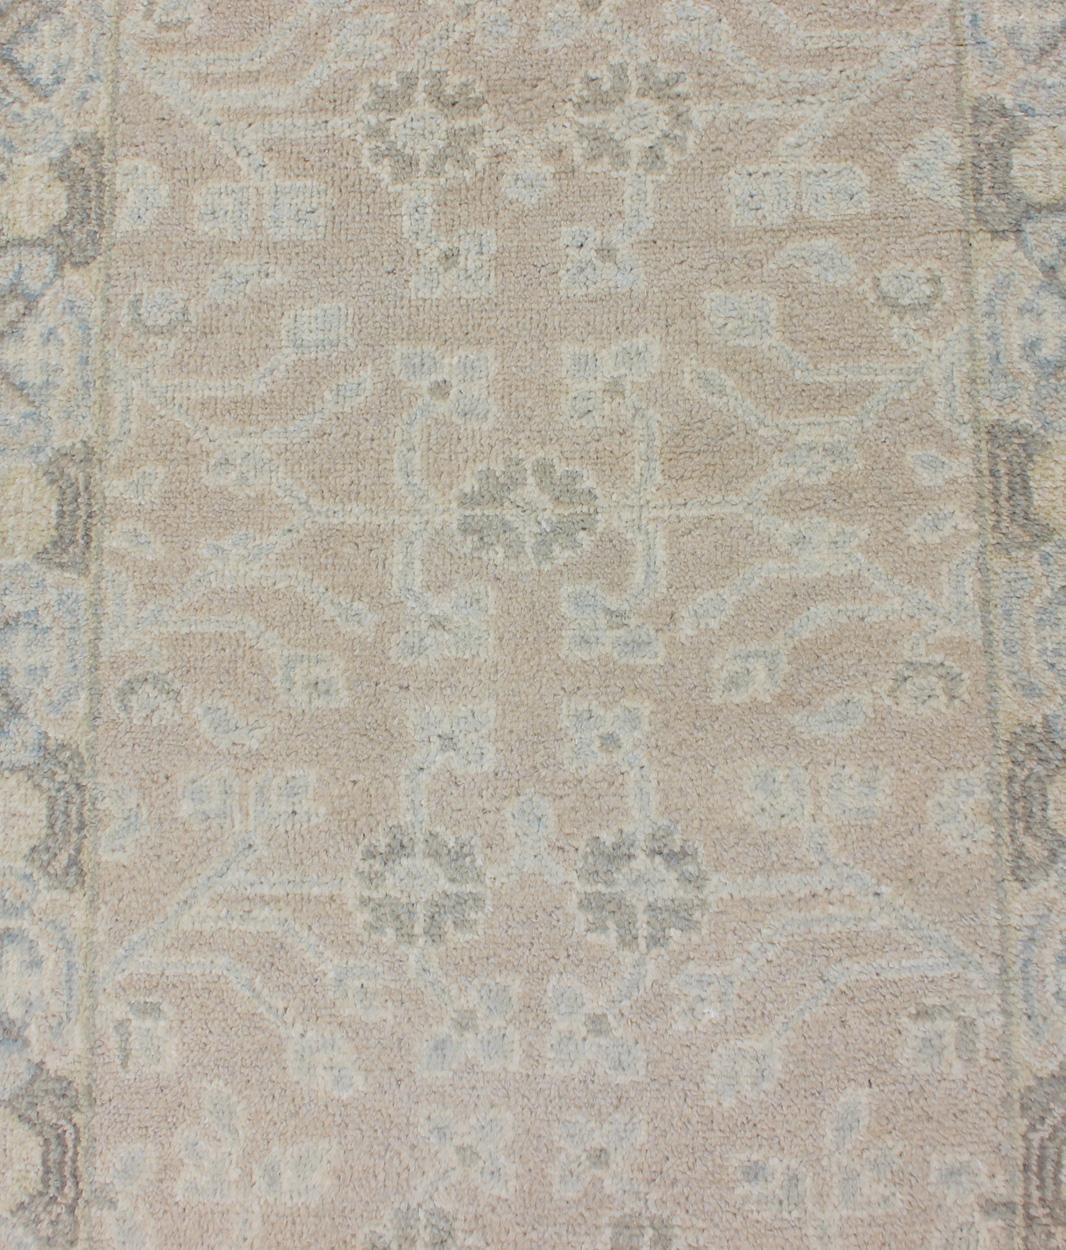 Keivan Woven Arts Khotan Runner in Wool with All-Over Sub-Geometric Design

Measures: 2'6 x 8'0

This modern Indian Khotan rug has been hand-knotted in wool and features an all-over, sub-geometric floral design rendered in blue and neutral tones. A